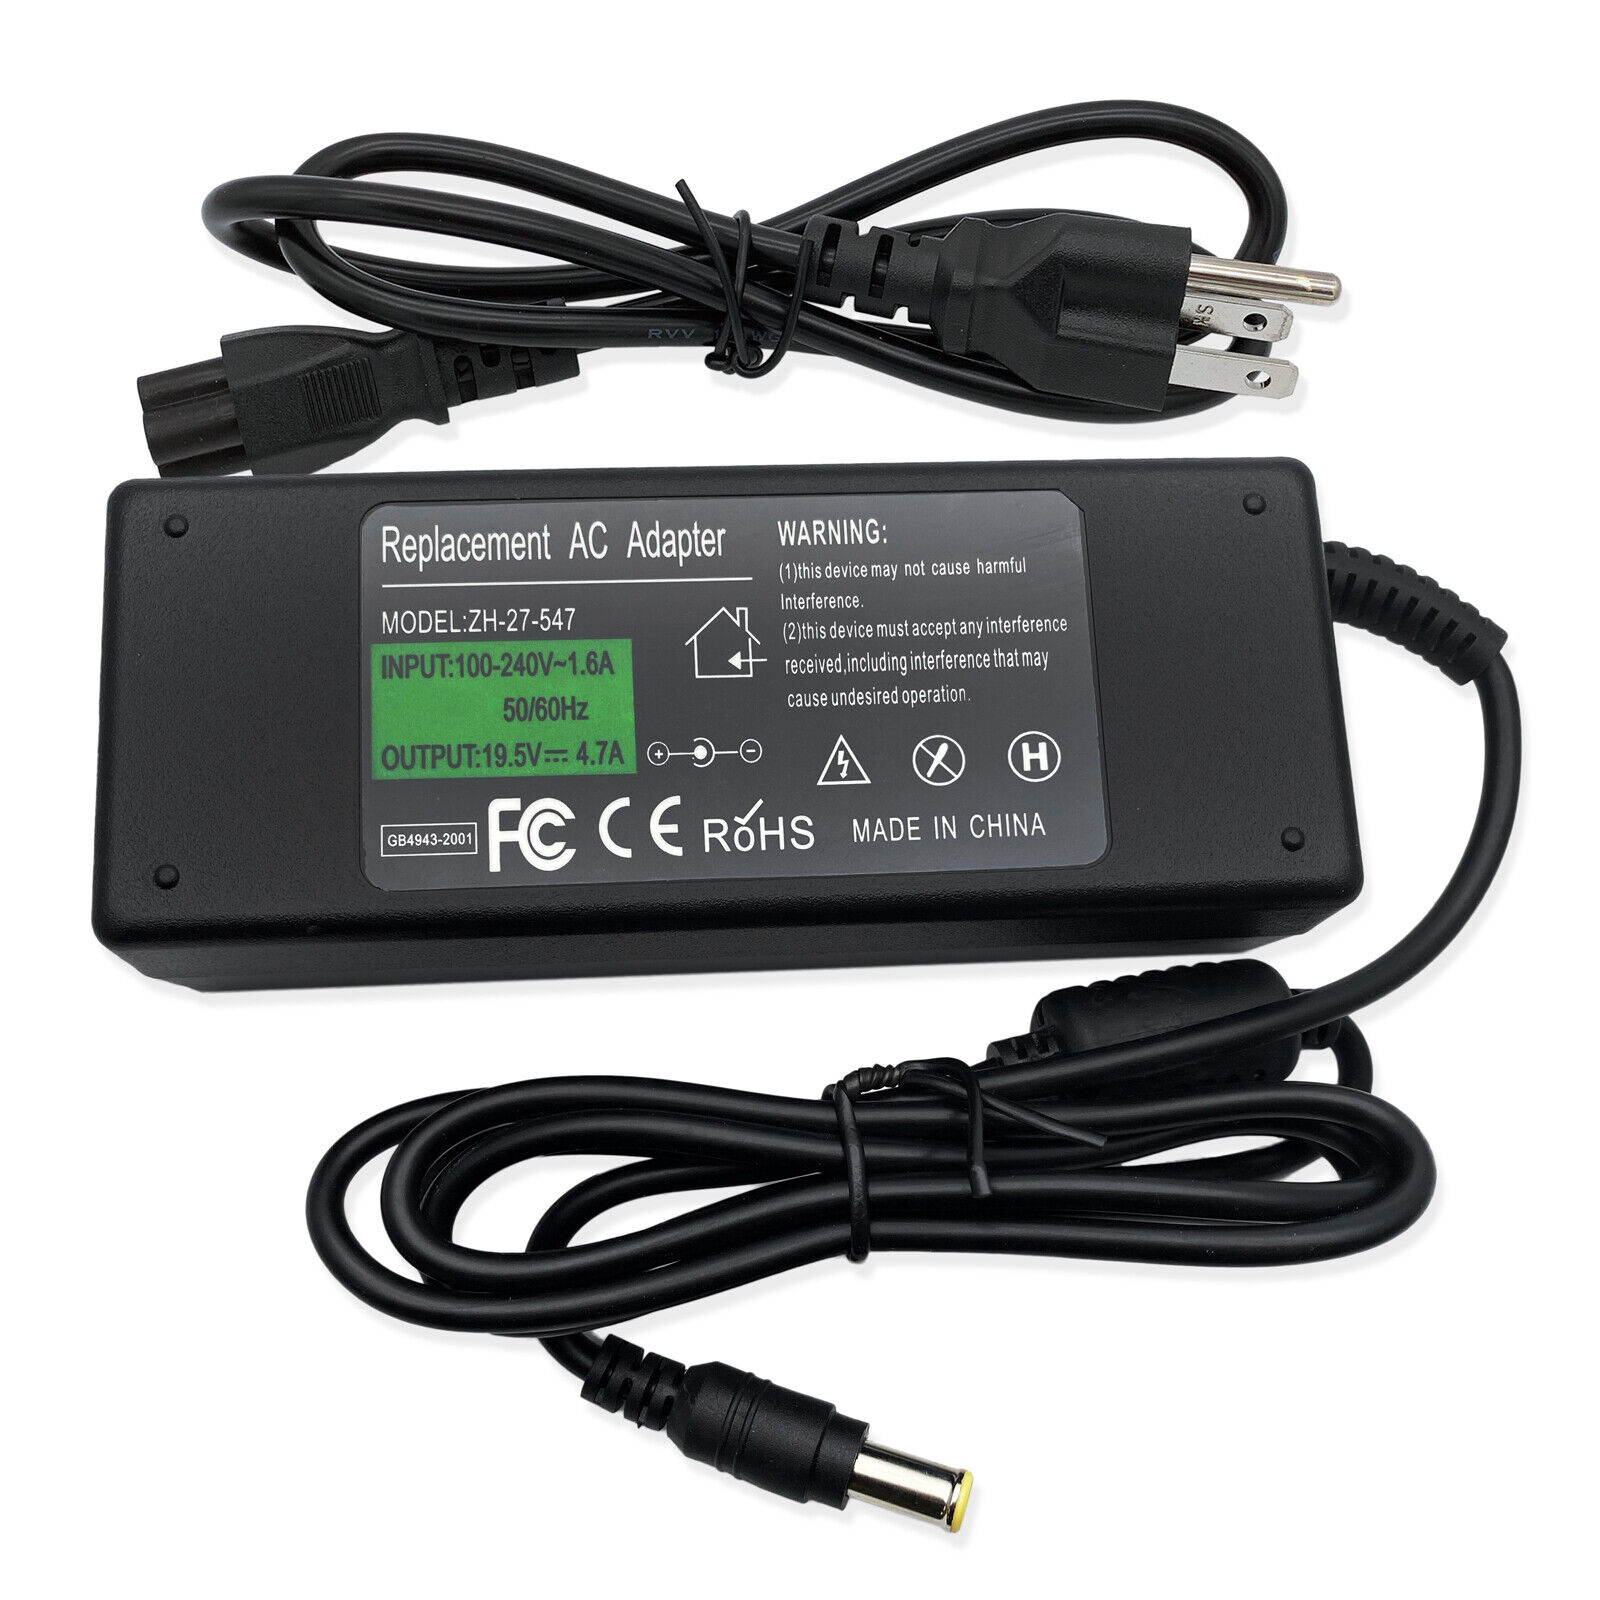 AC ADAPTER CHARGER POWER FOR Sony Vaio PCG-61A12L PCG-61A13L PCG-61A14L